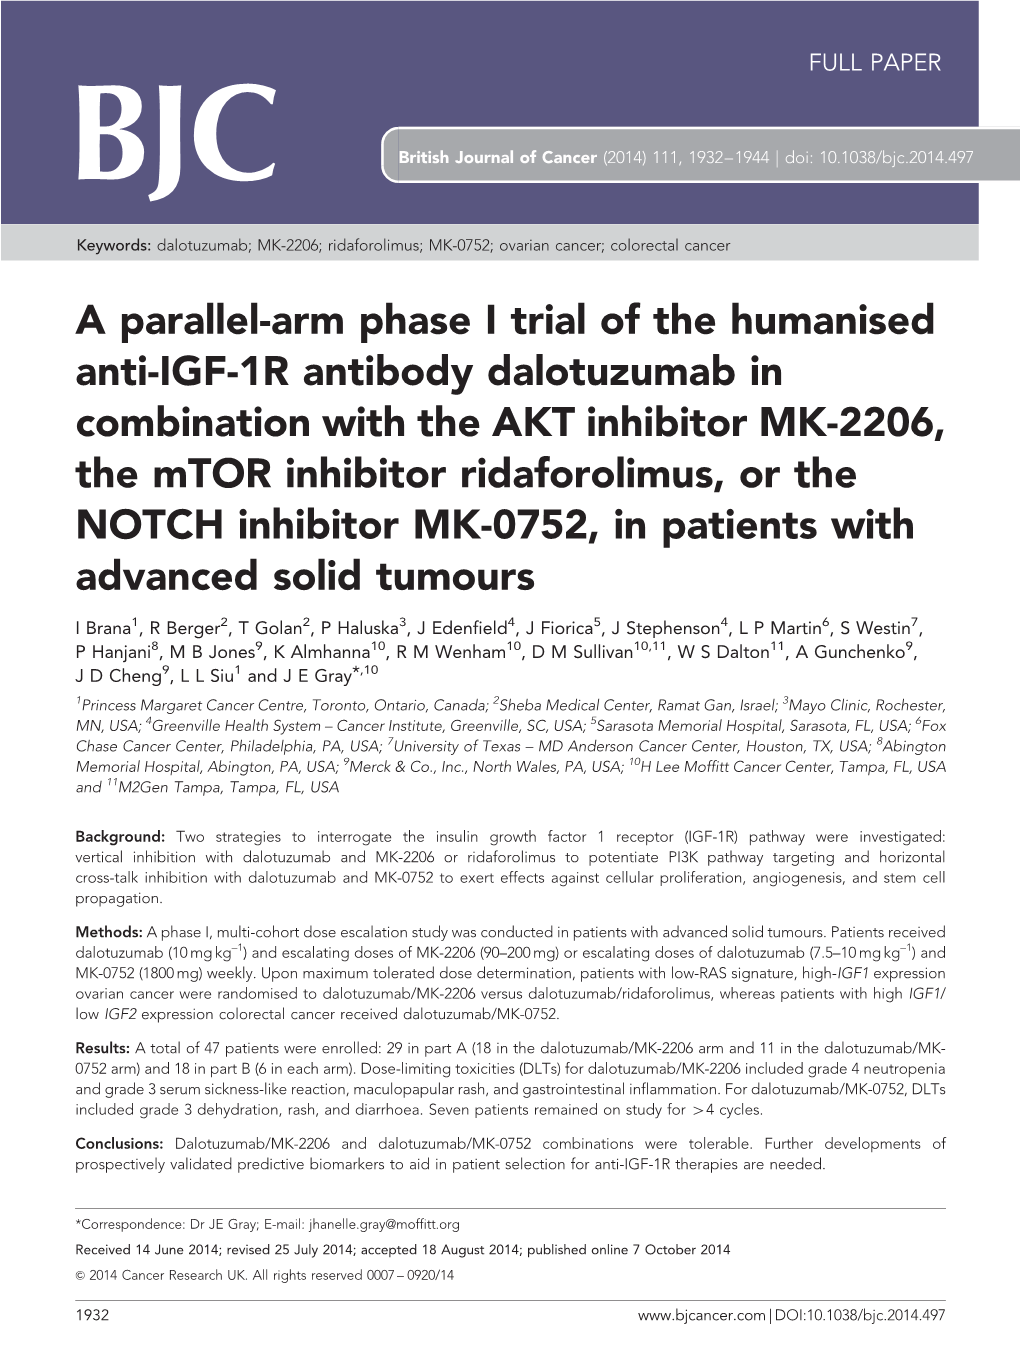 A Parallel-Arm Phase I Trial of the Humanised Anti-IGF-1R Antibody